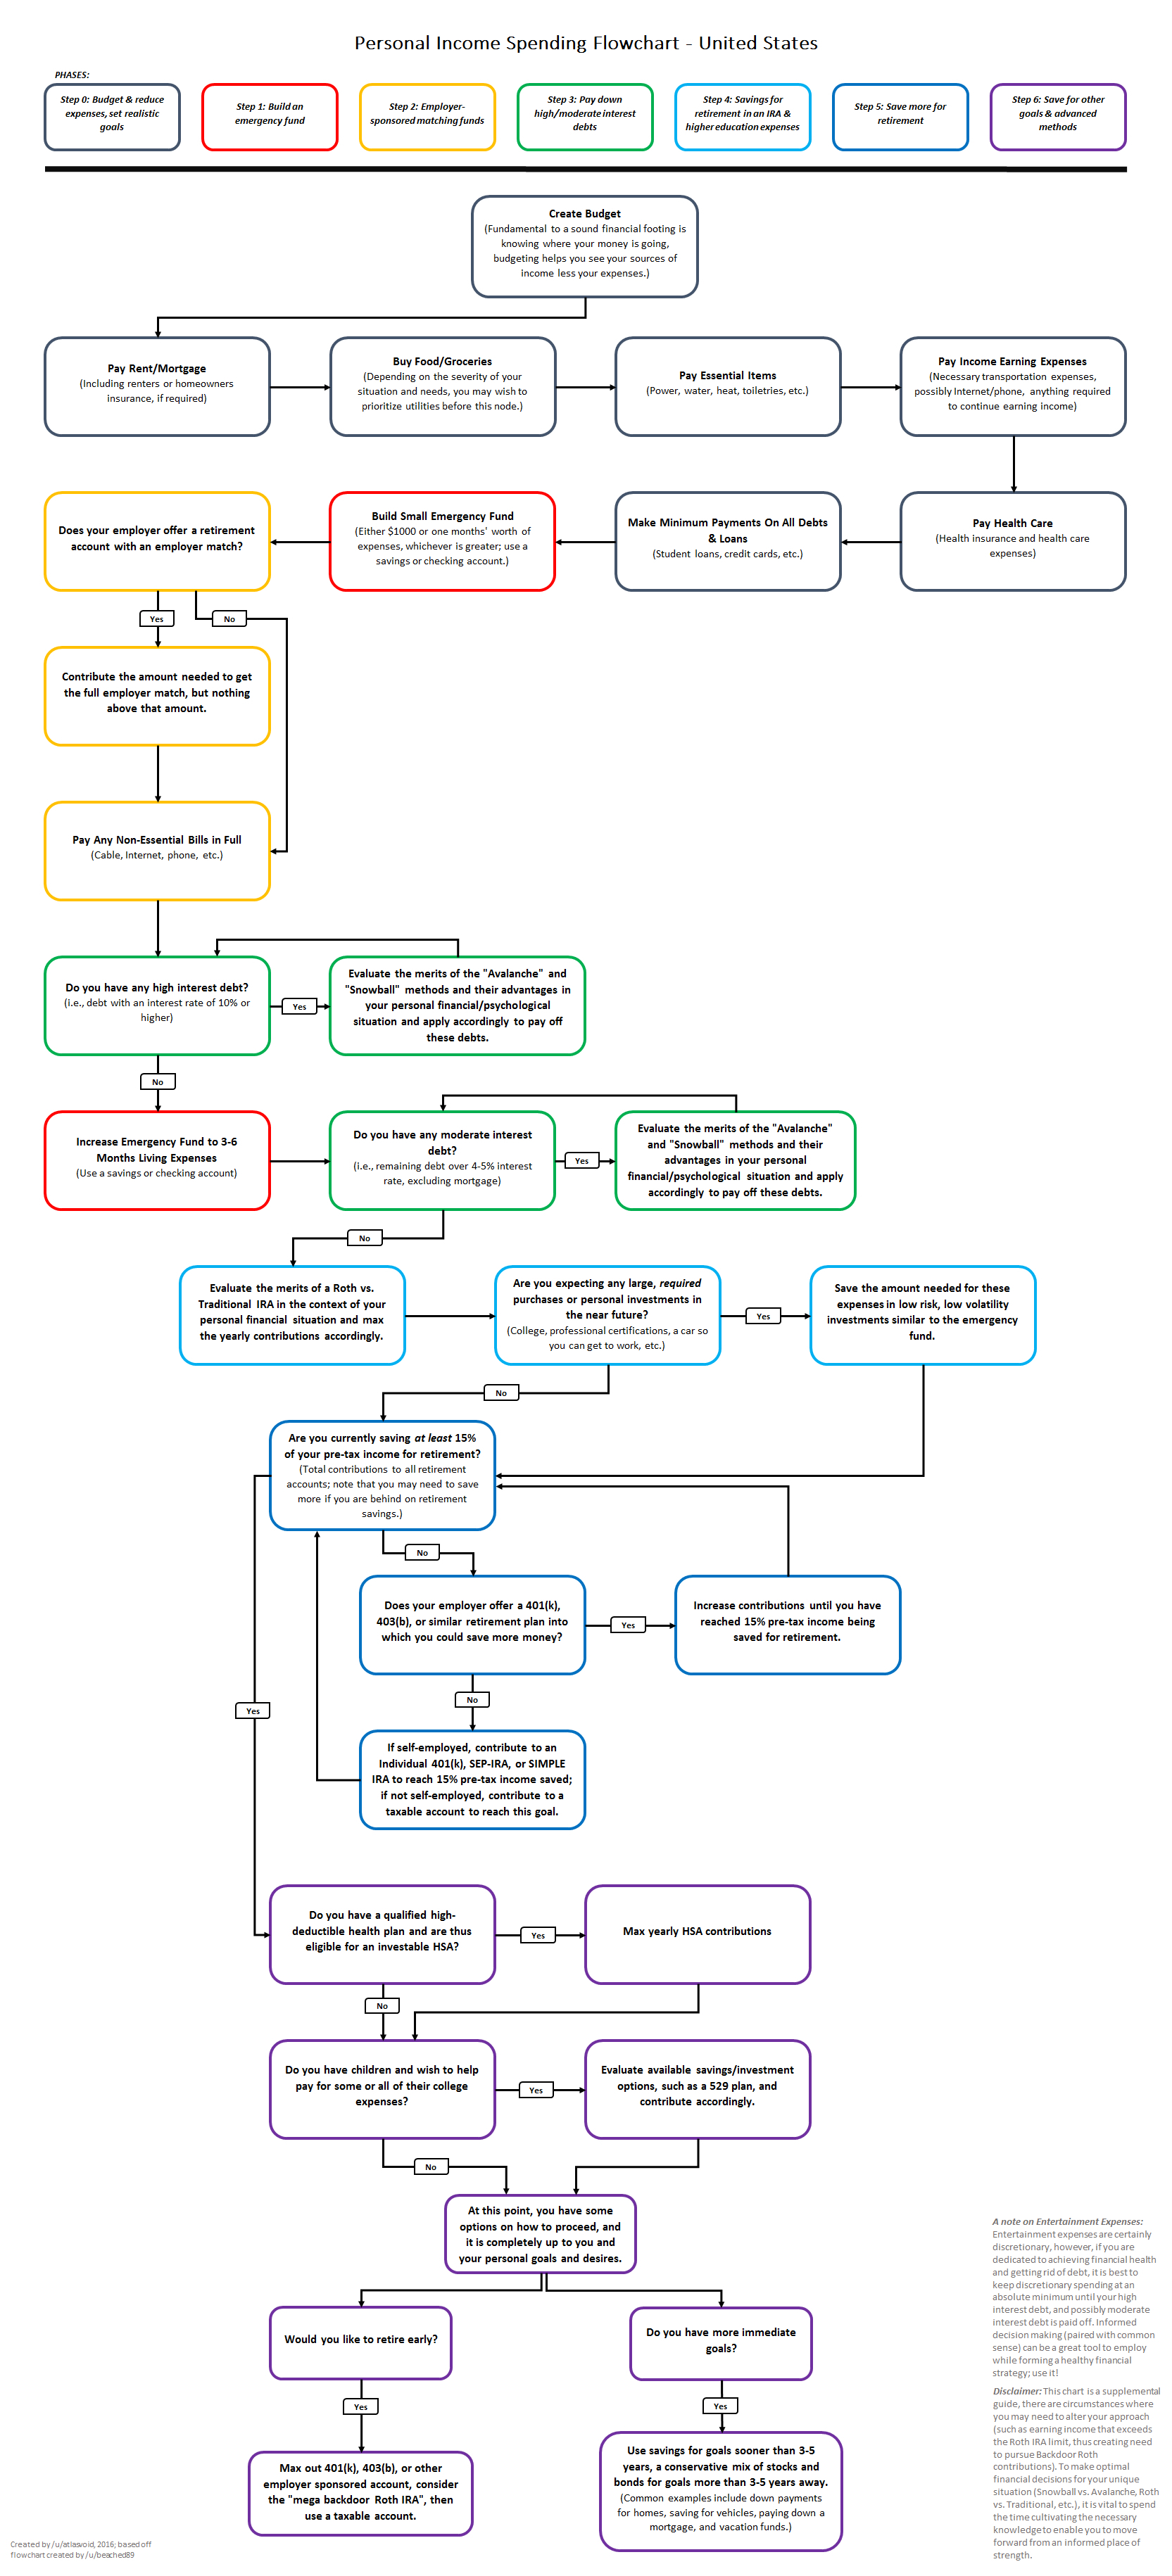 Martin Lewis Budget Spreadsheet throughout How To Prioritize Spending Your Money  A Flowchart Redesigned